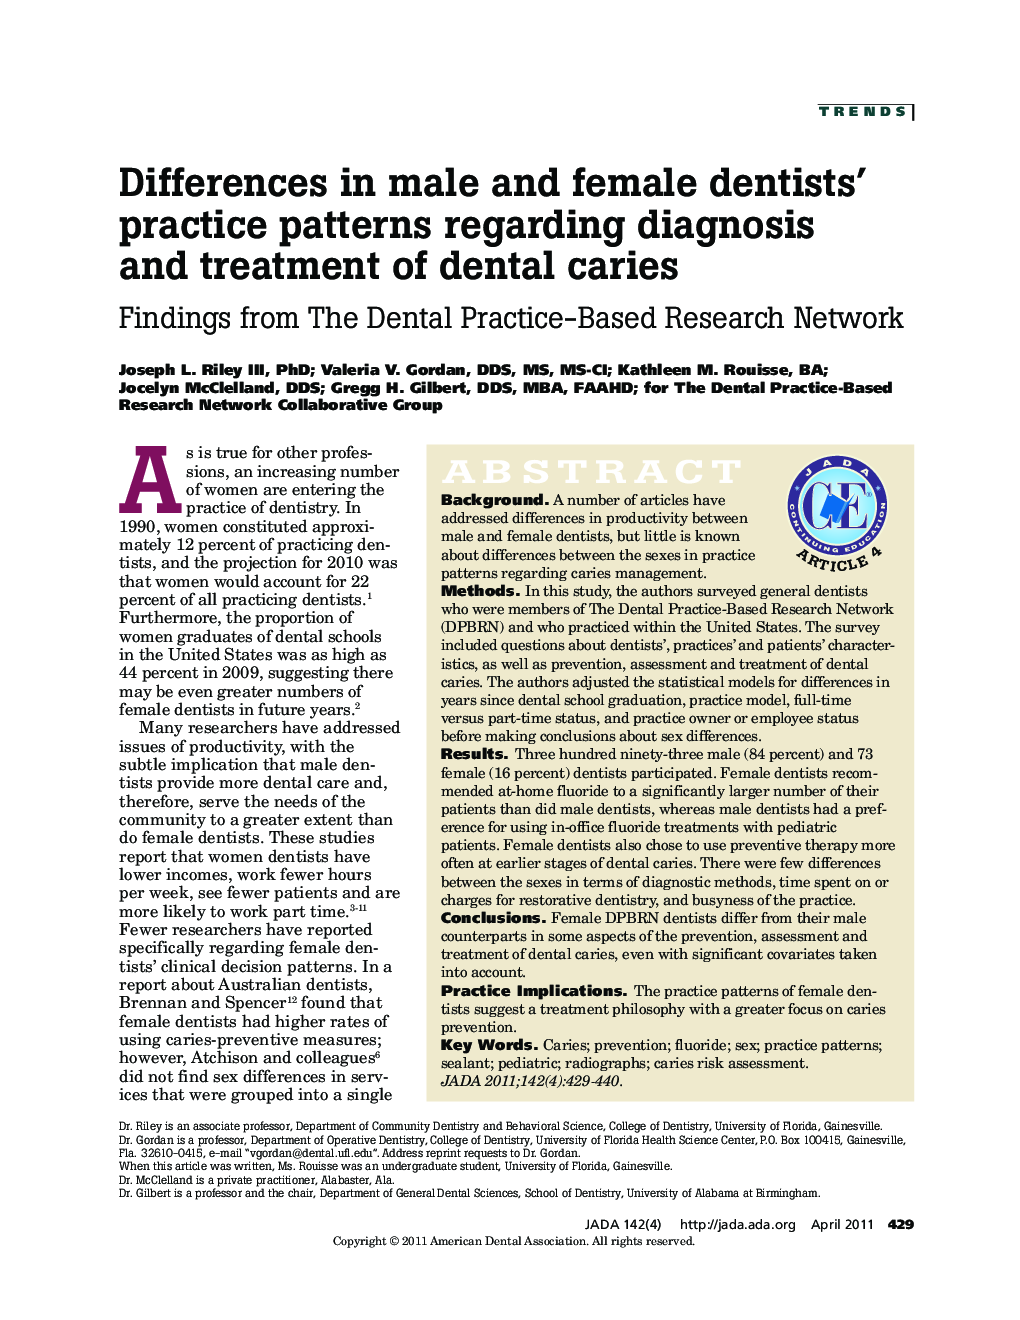 Differences in male and female dentists' practice patterns regarding diagnosis and treatment of dental caries : Findings from The Dental Practice-Based Research Network